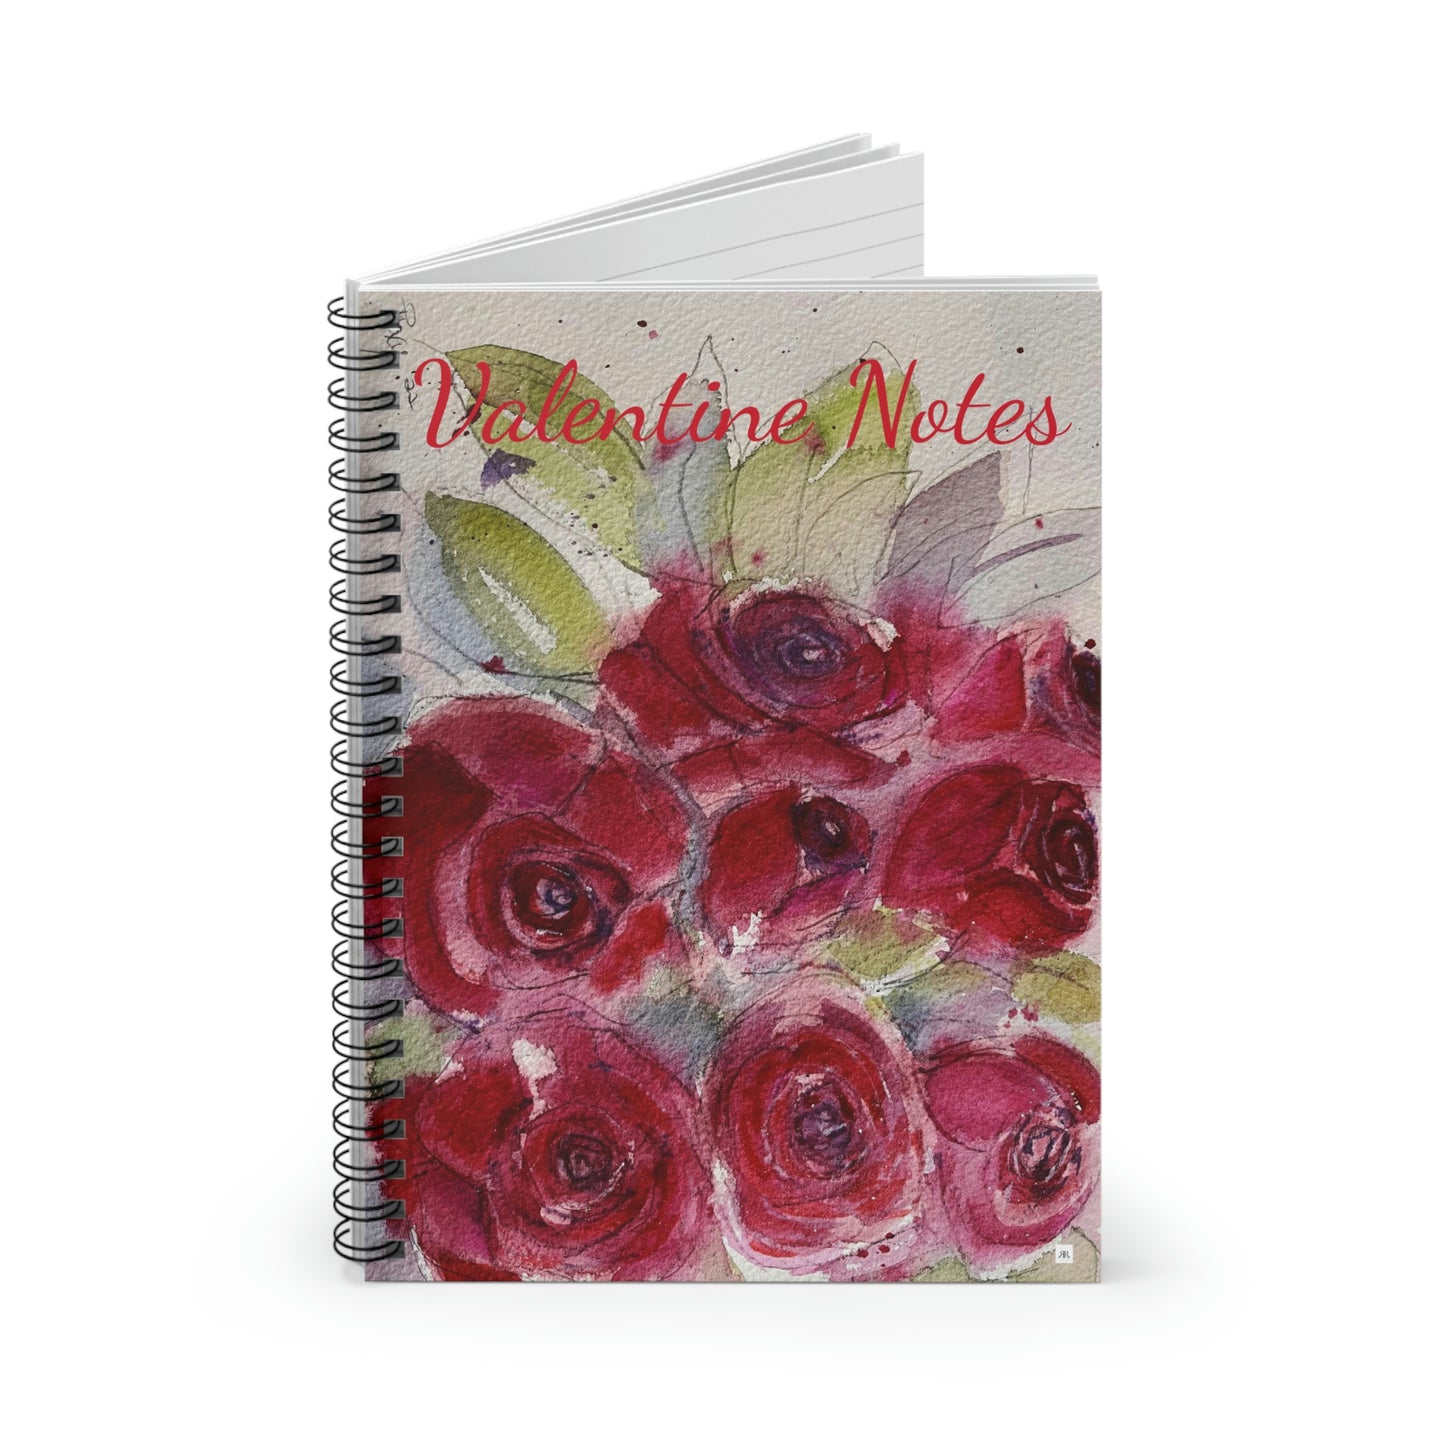 Red Roses "Valentine Notes" Spiral Notebook